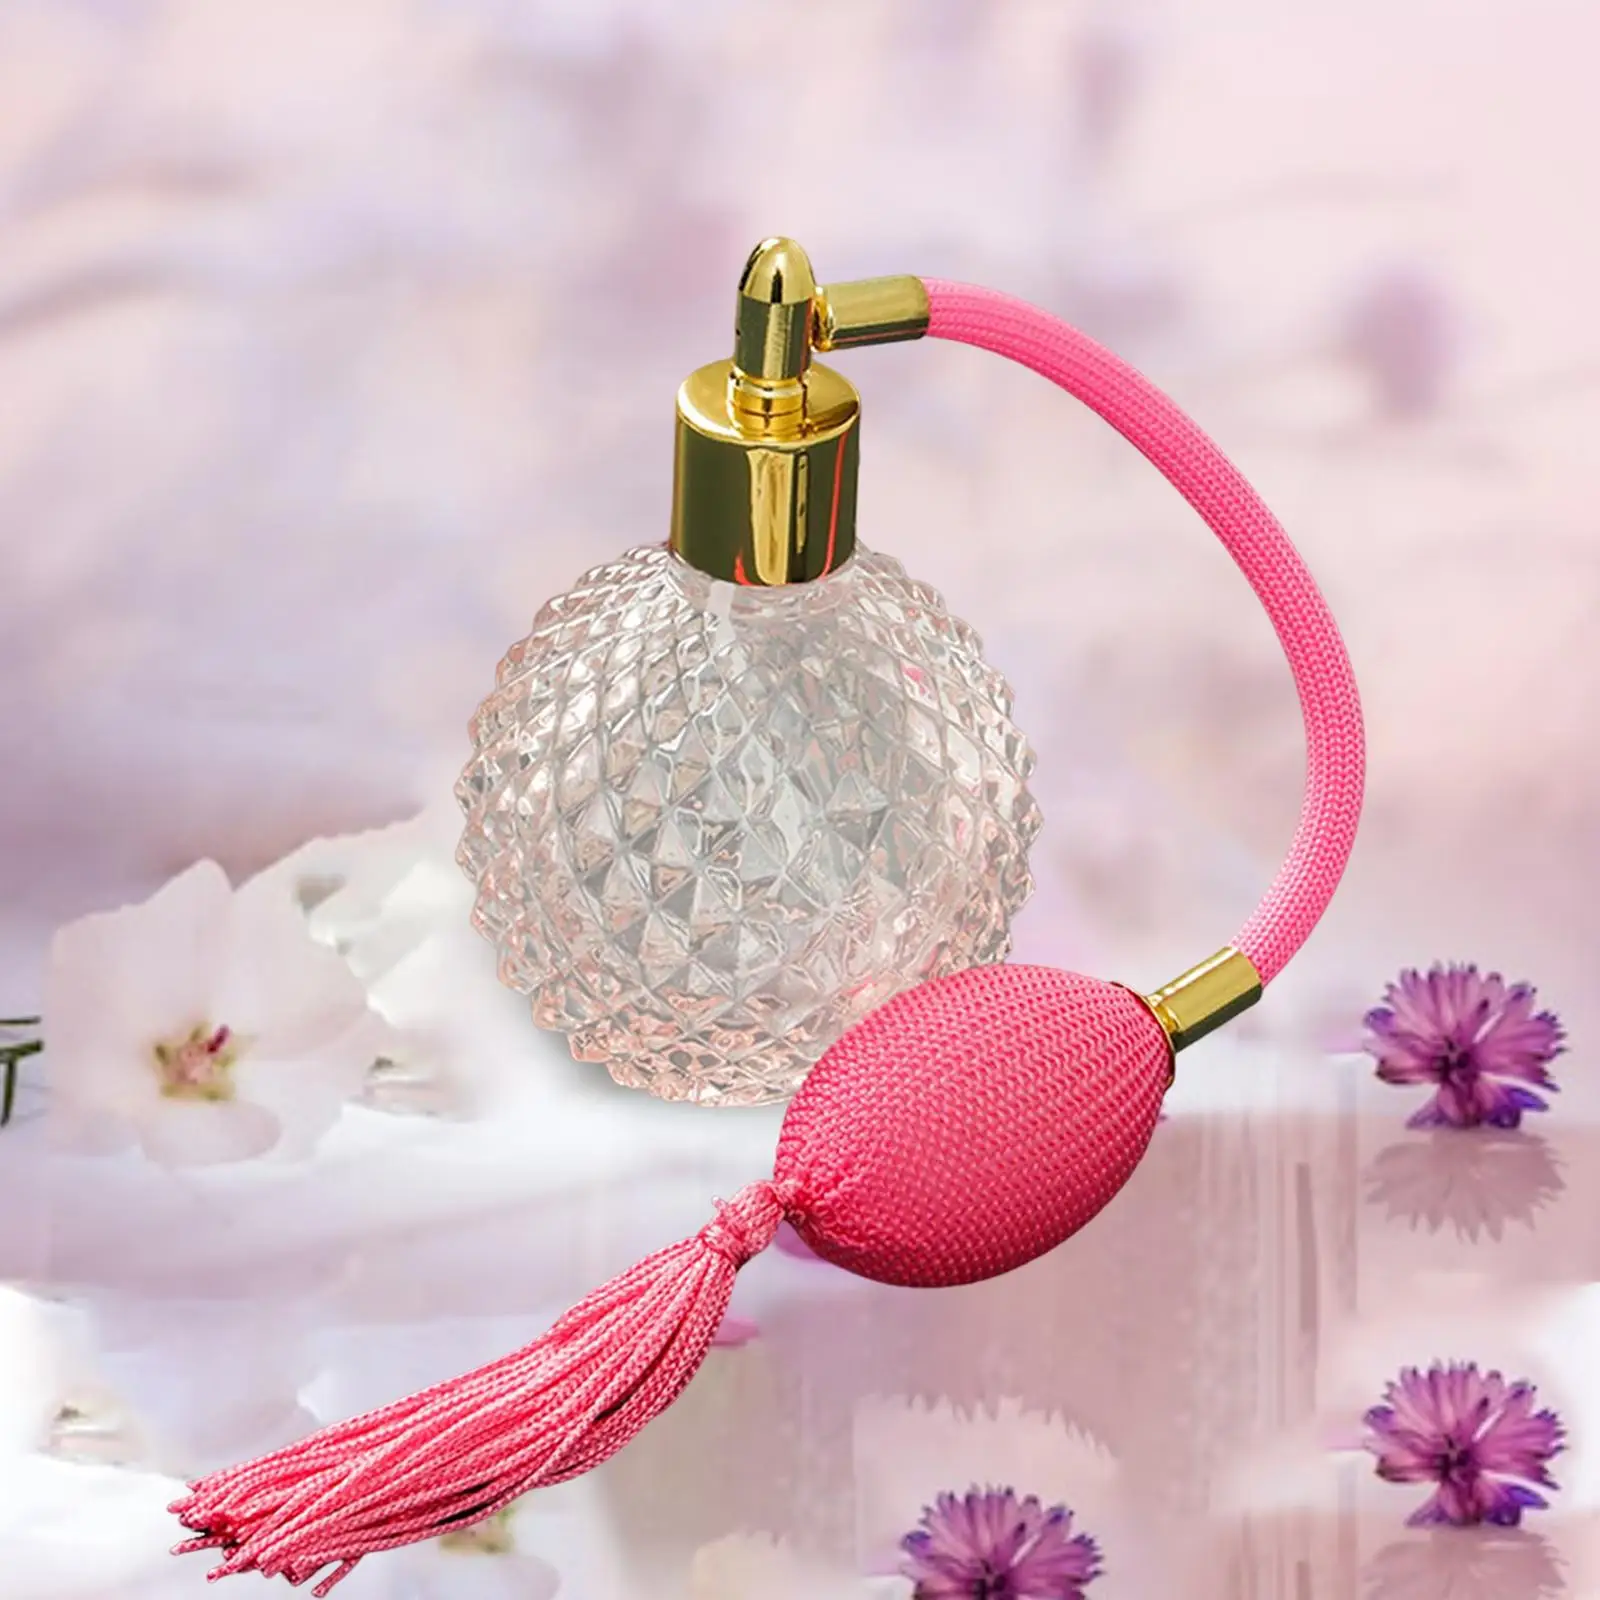 Vintage Perfume Bottle Spray Perfume Bottle Lightweight Durable with Long Tassel 100ml Portable Glass Makeup Tool Container